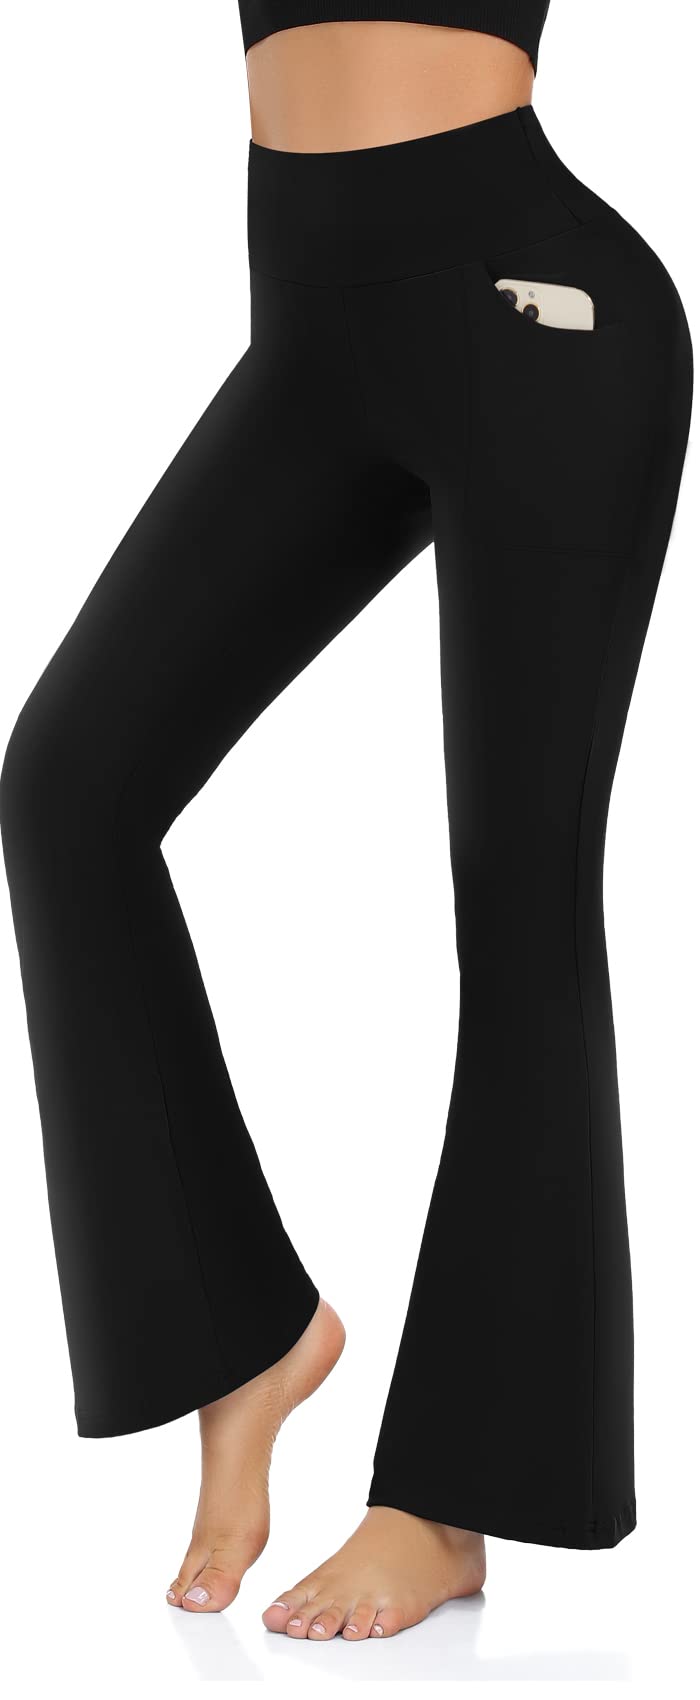 Junior's Hard Work Pays Off V438 Black Athletic Workout Leggings One Size  Fit Most at Amazon Women's Clothing store